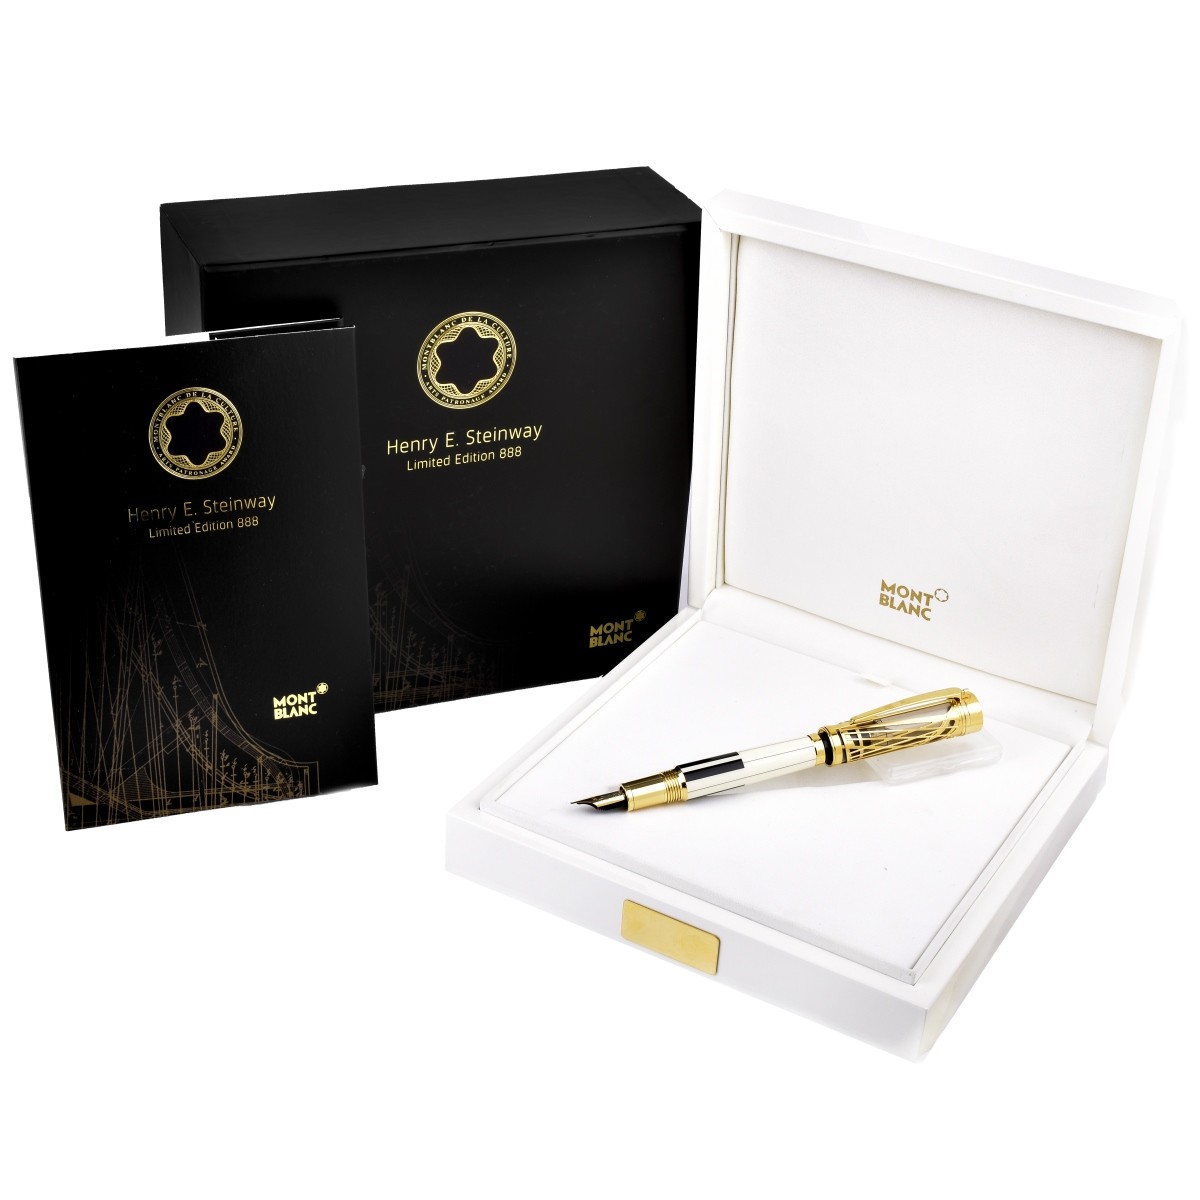 Montblanc Steinway Limited Edition 888